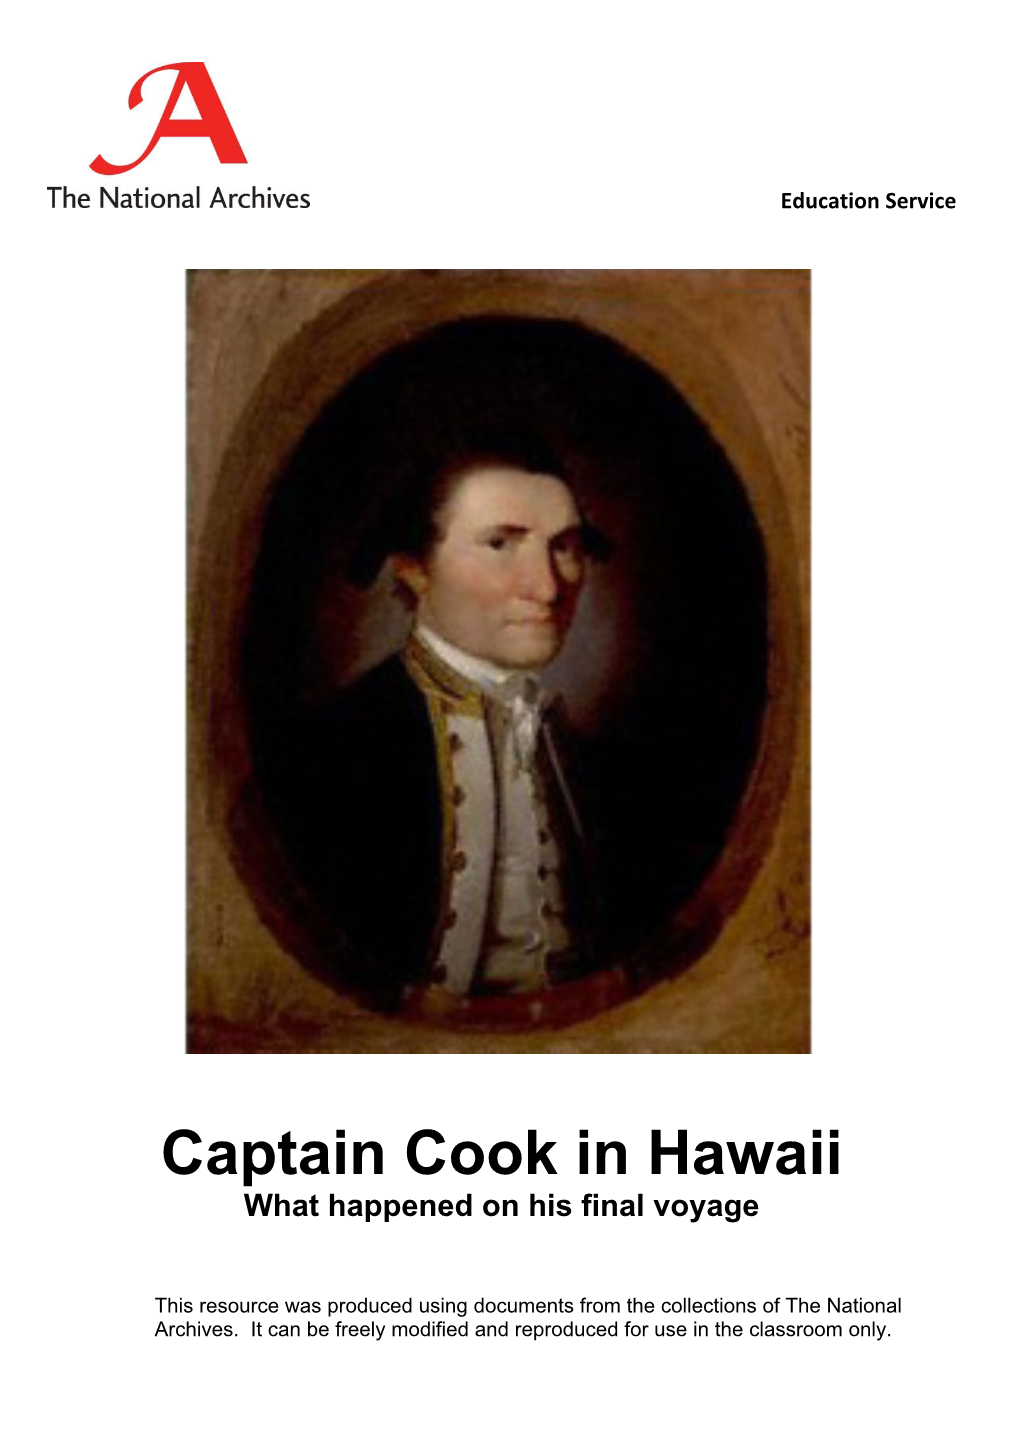 Captain Cook in Hawaii What Happened on His Final Voyage